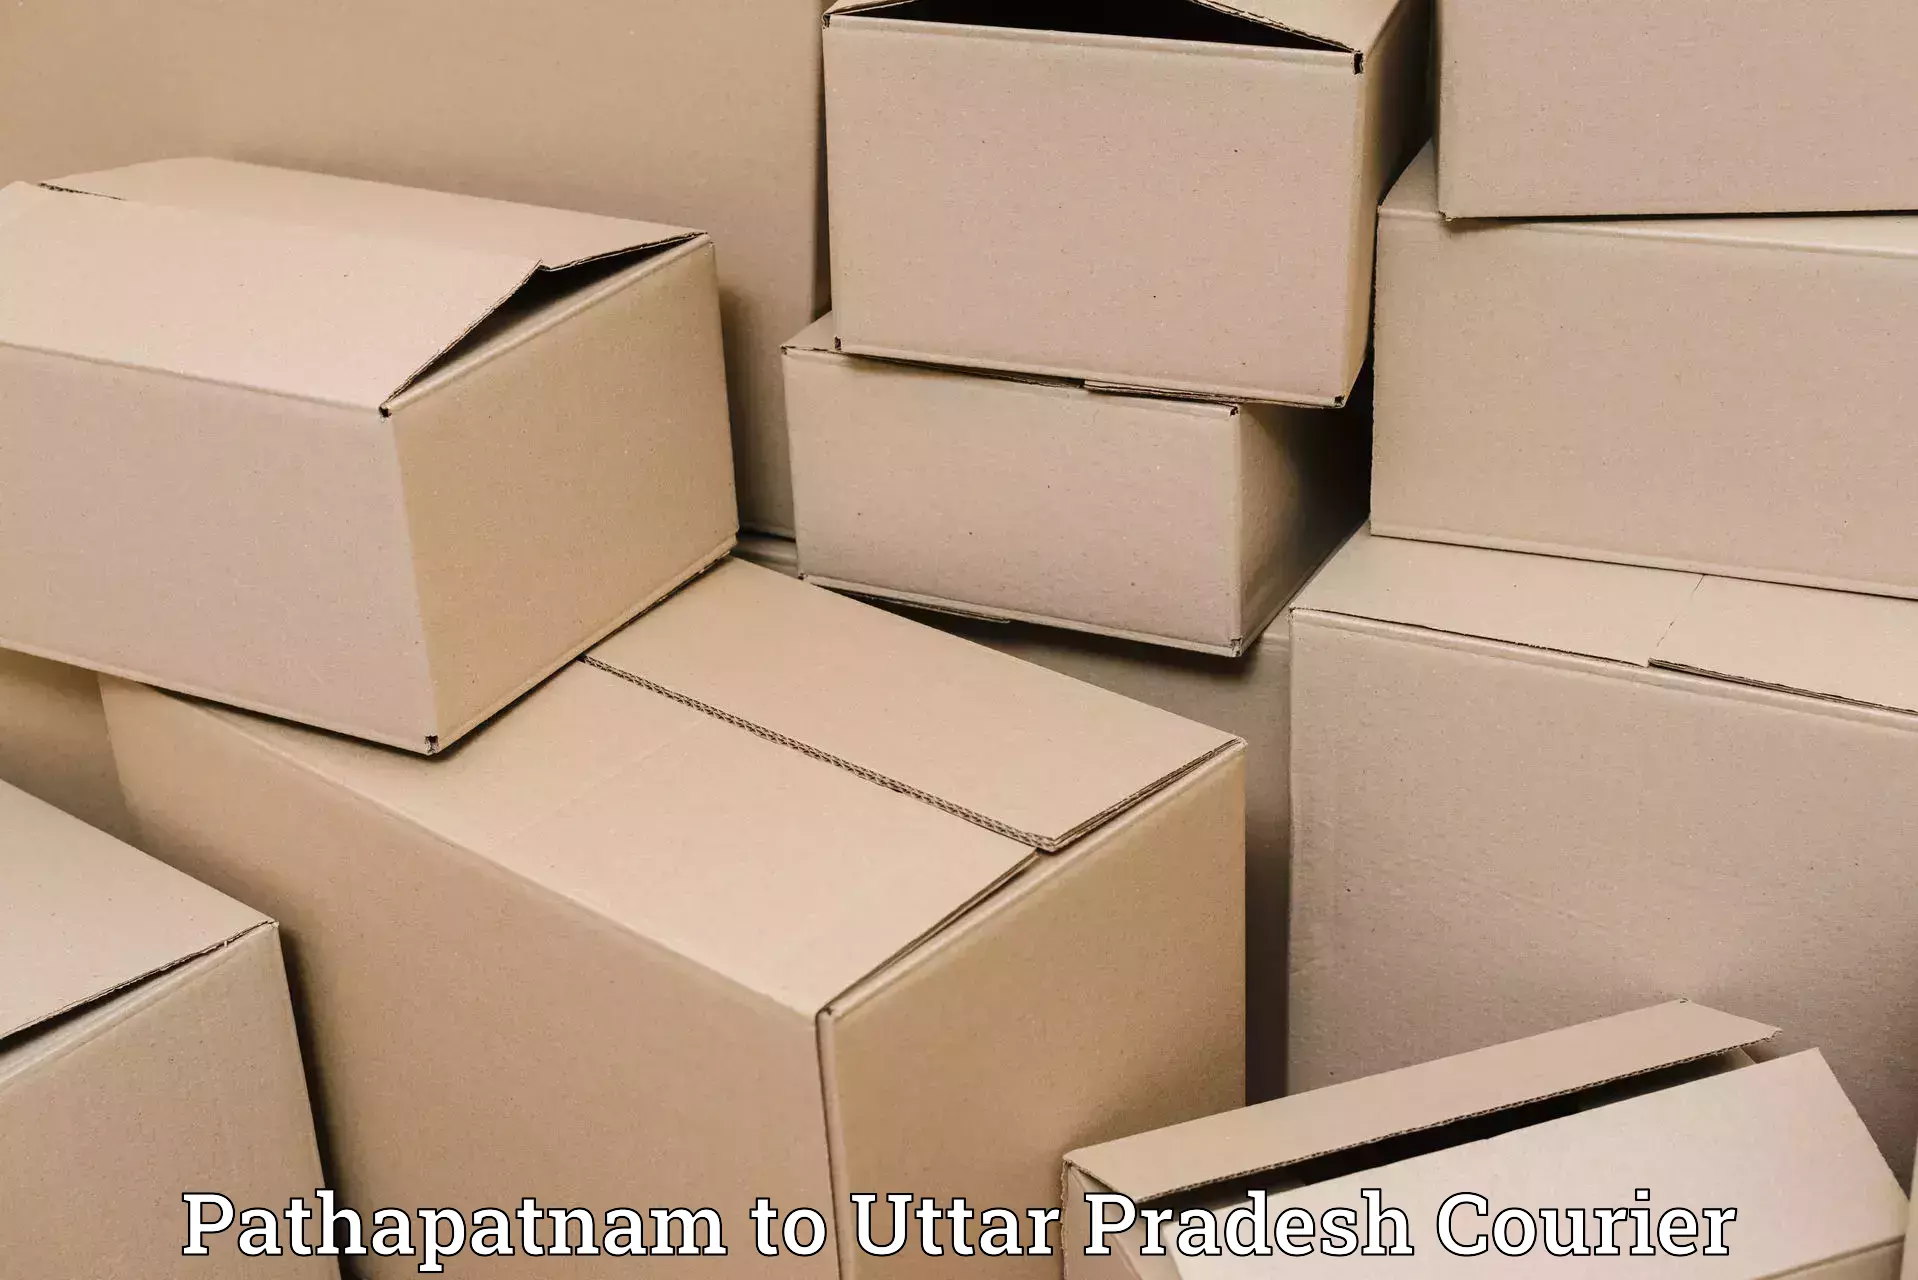 Fastest parcel delivery in Pathapatnam to Rasulabad